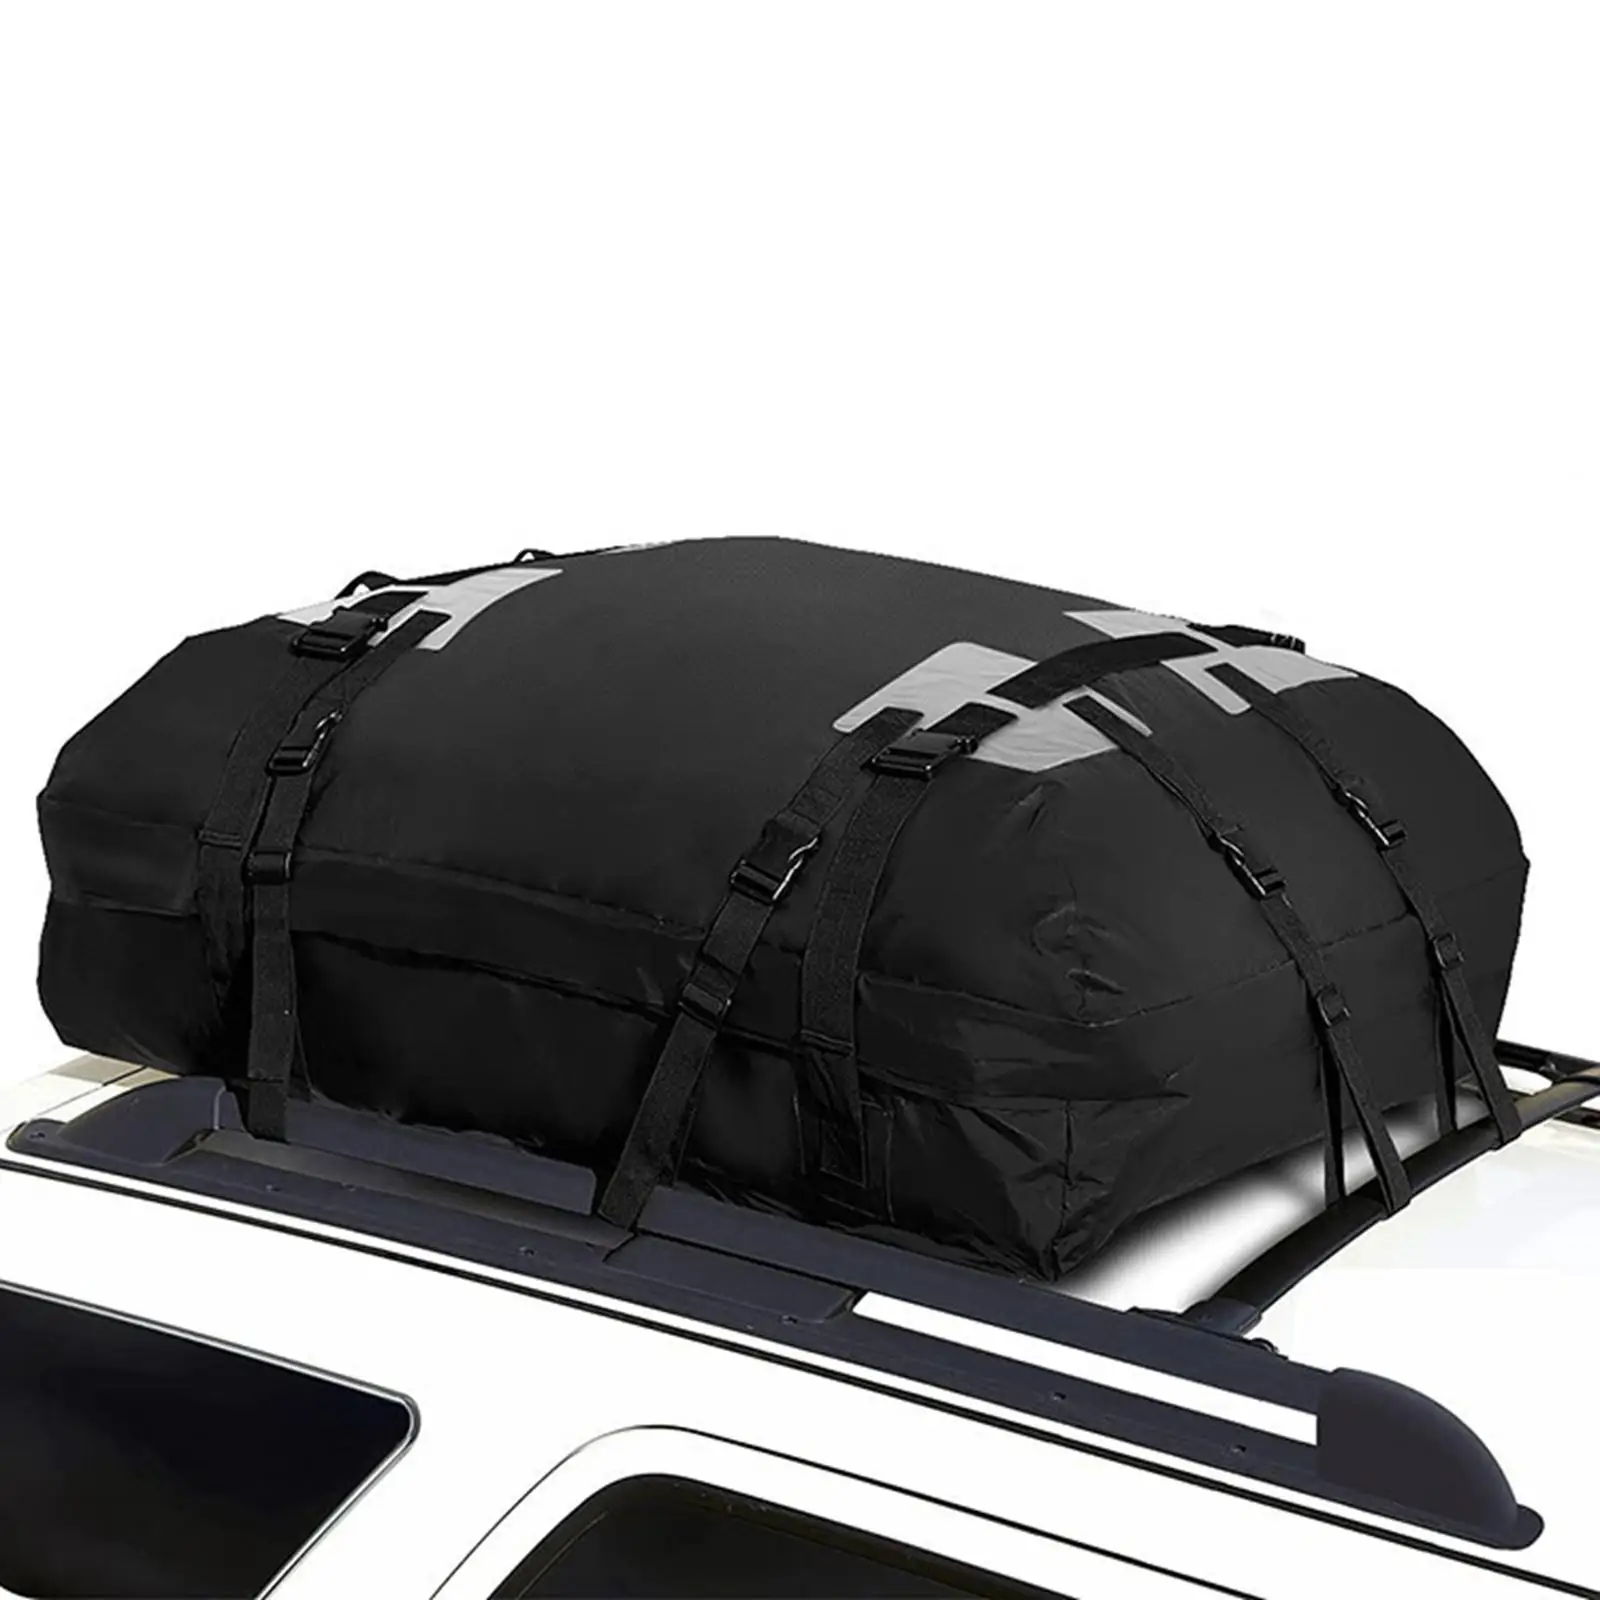 Rooftop Cargo Carrier, Waterproof Rooftop Cargo Carrier for Car with Straps Storage Bag